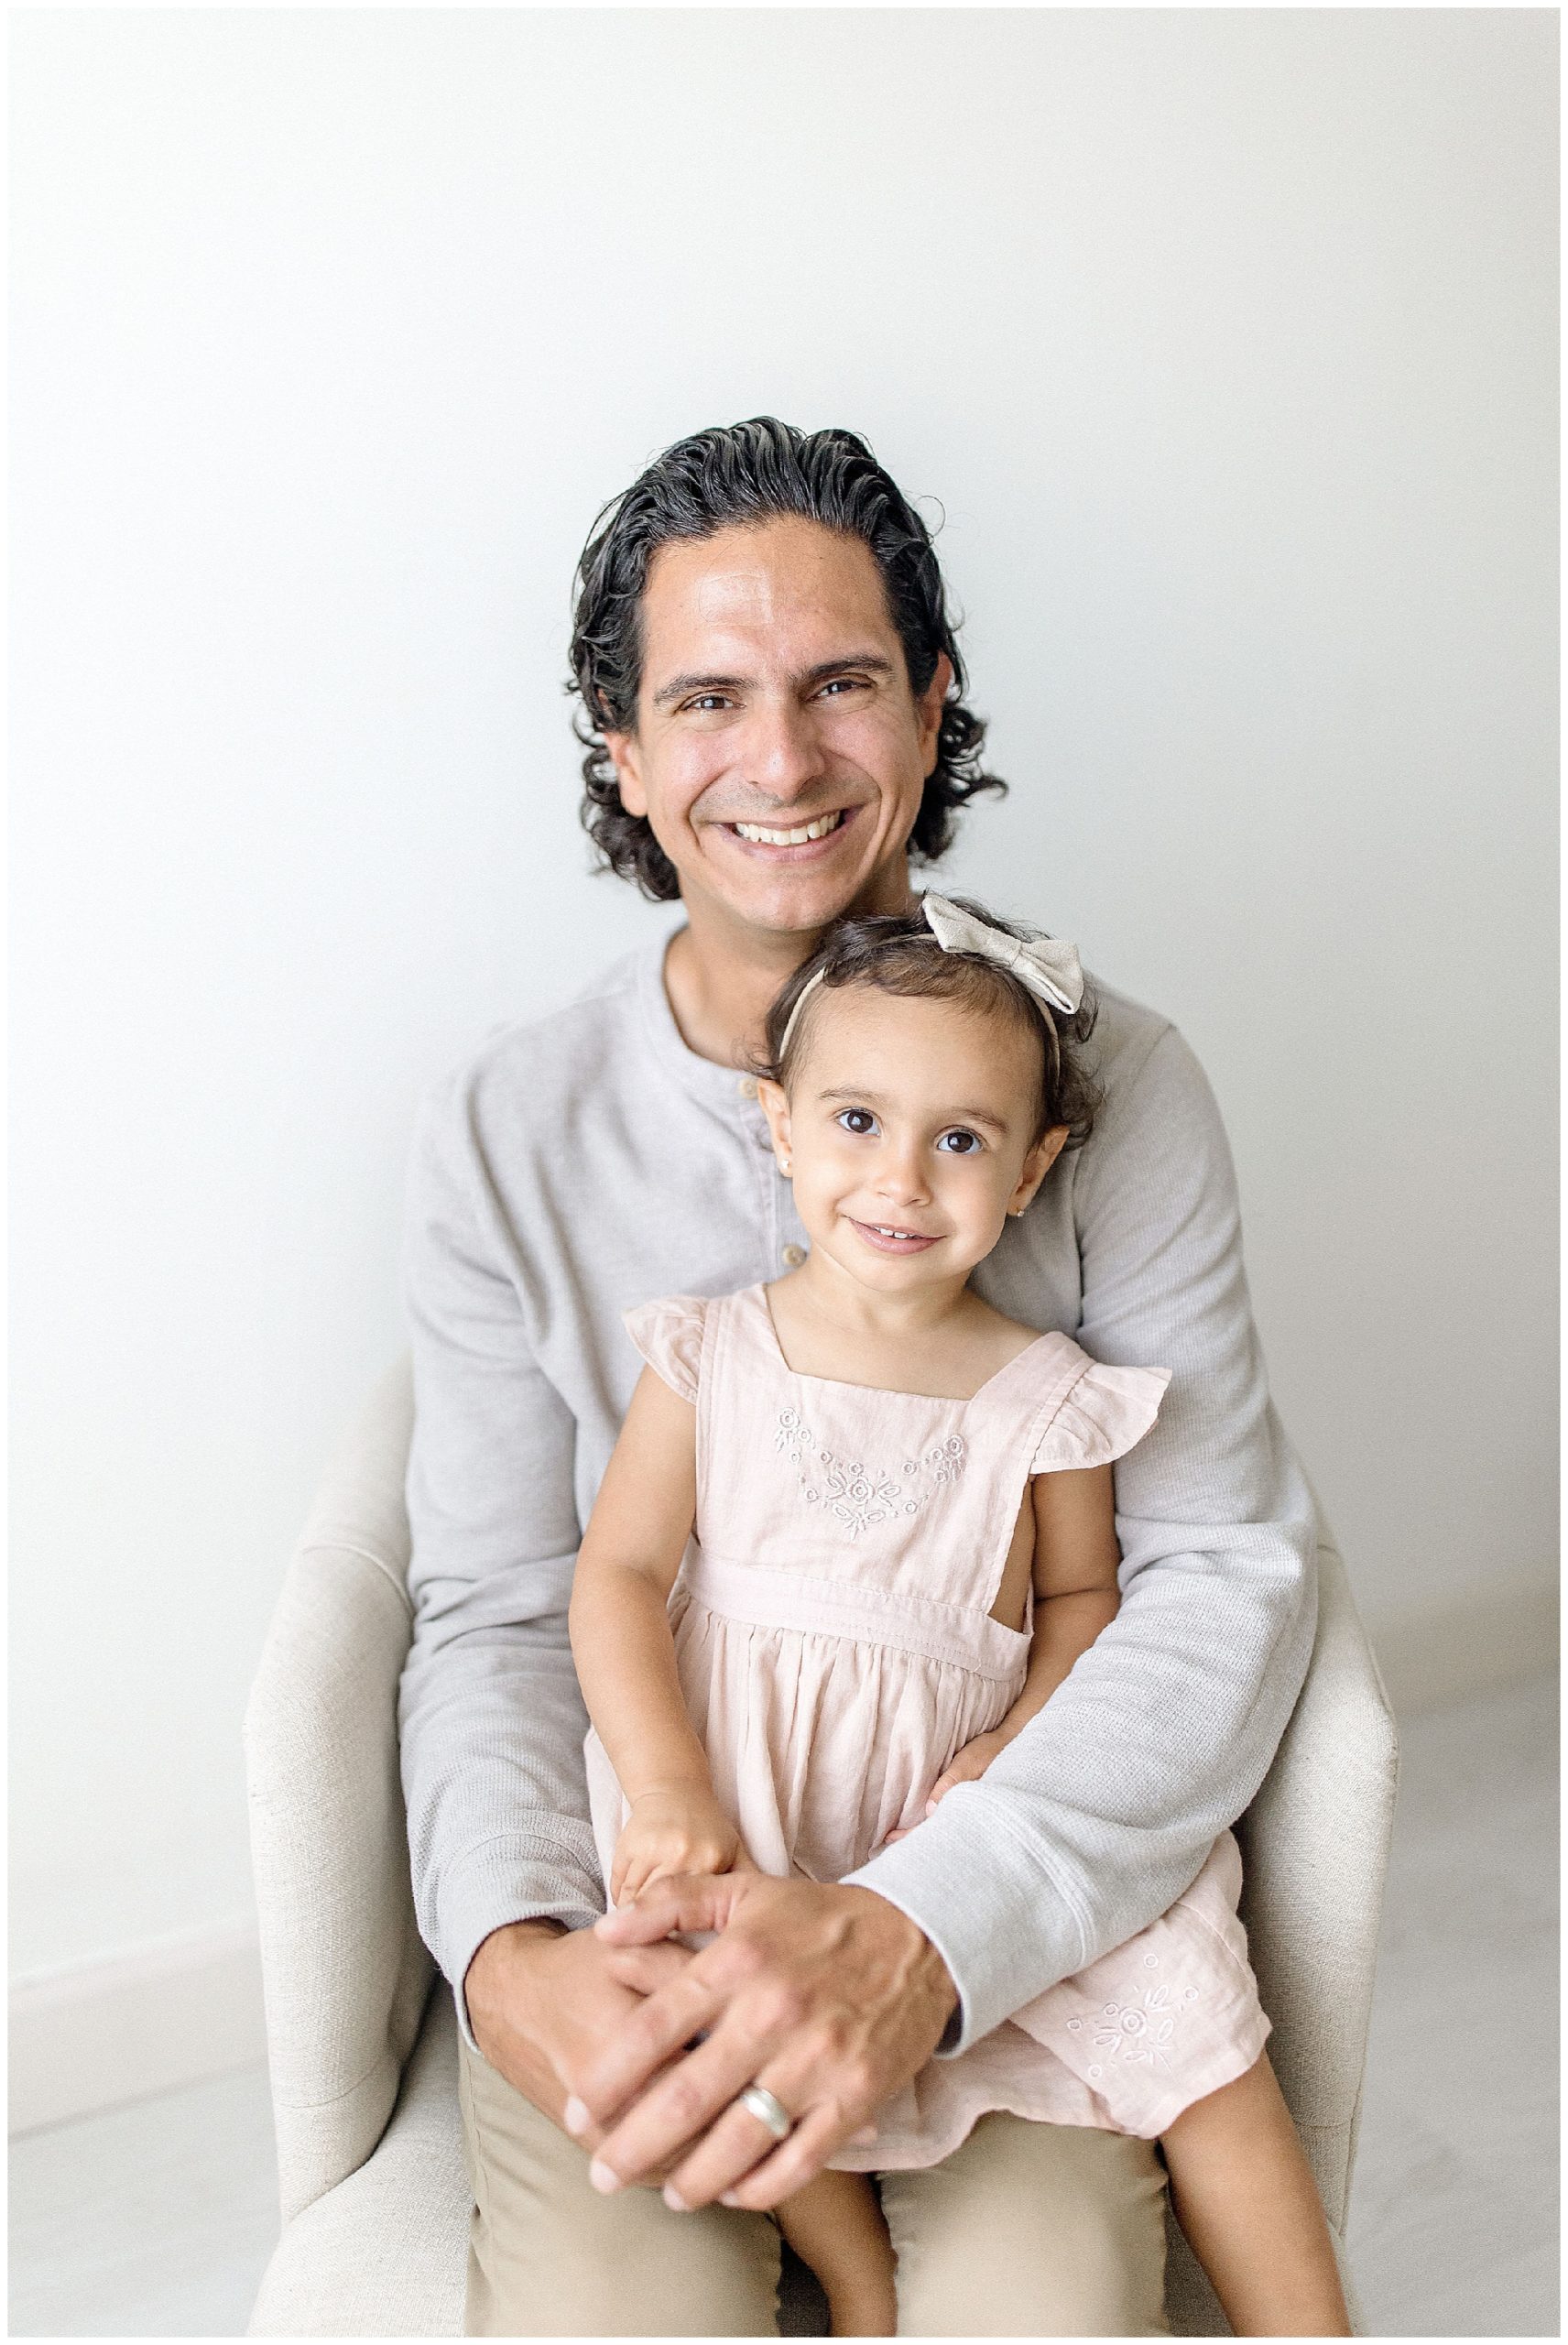 Daughter sits in dad's lap for portrait. Photo by Ivanna Vidal Photography.